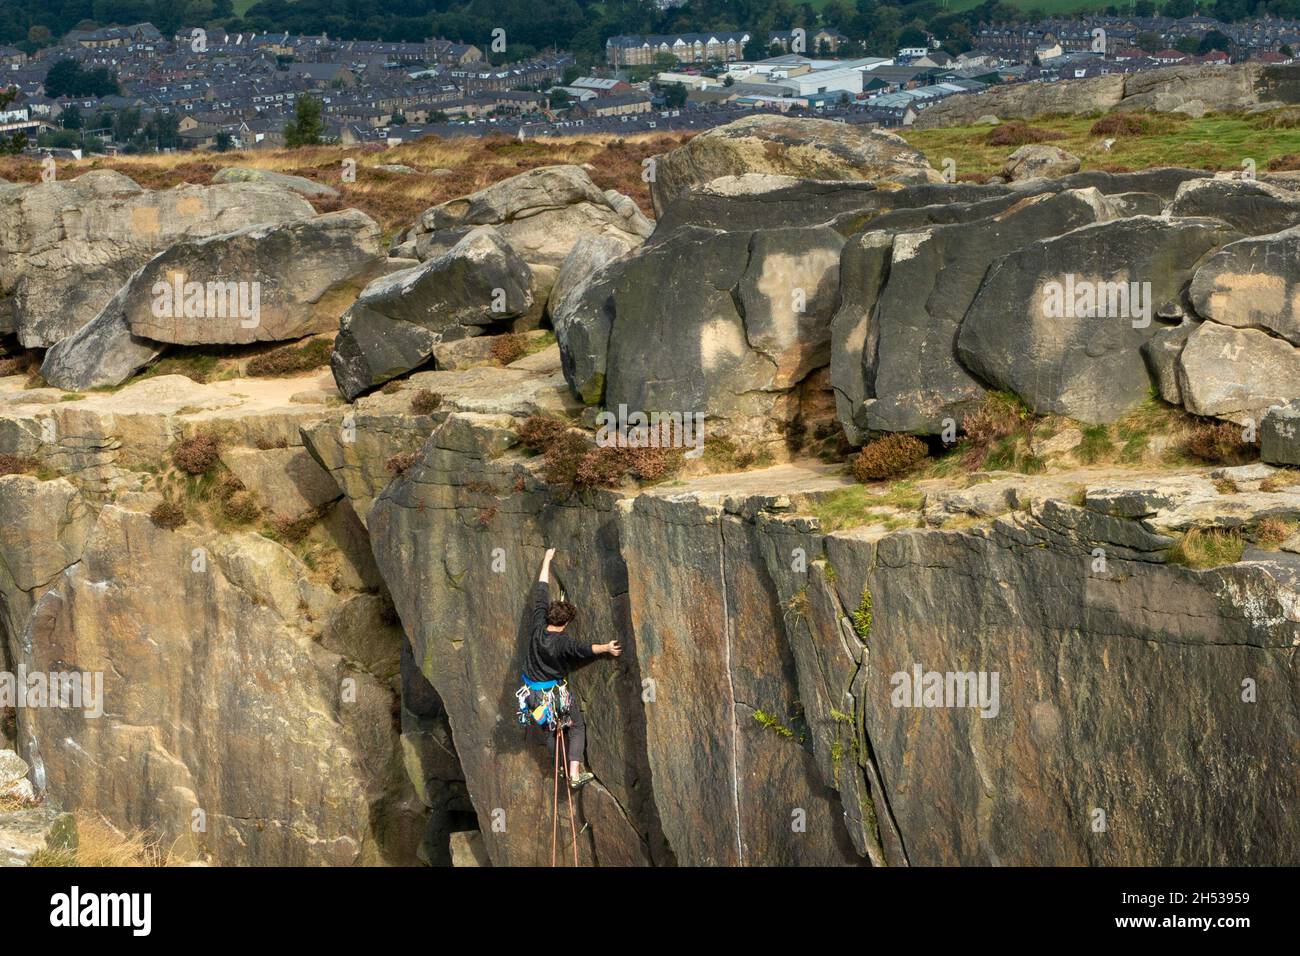 Rock climber using traditional gear at the top of a rock climb in Ilkley Quarry at the Cow and Calf Rocks with views over Ilkley town. Yorkshire, UK Stock Photo